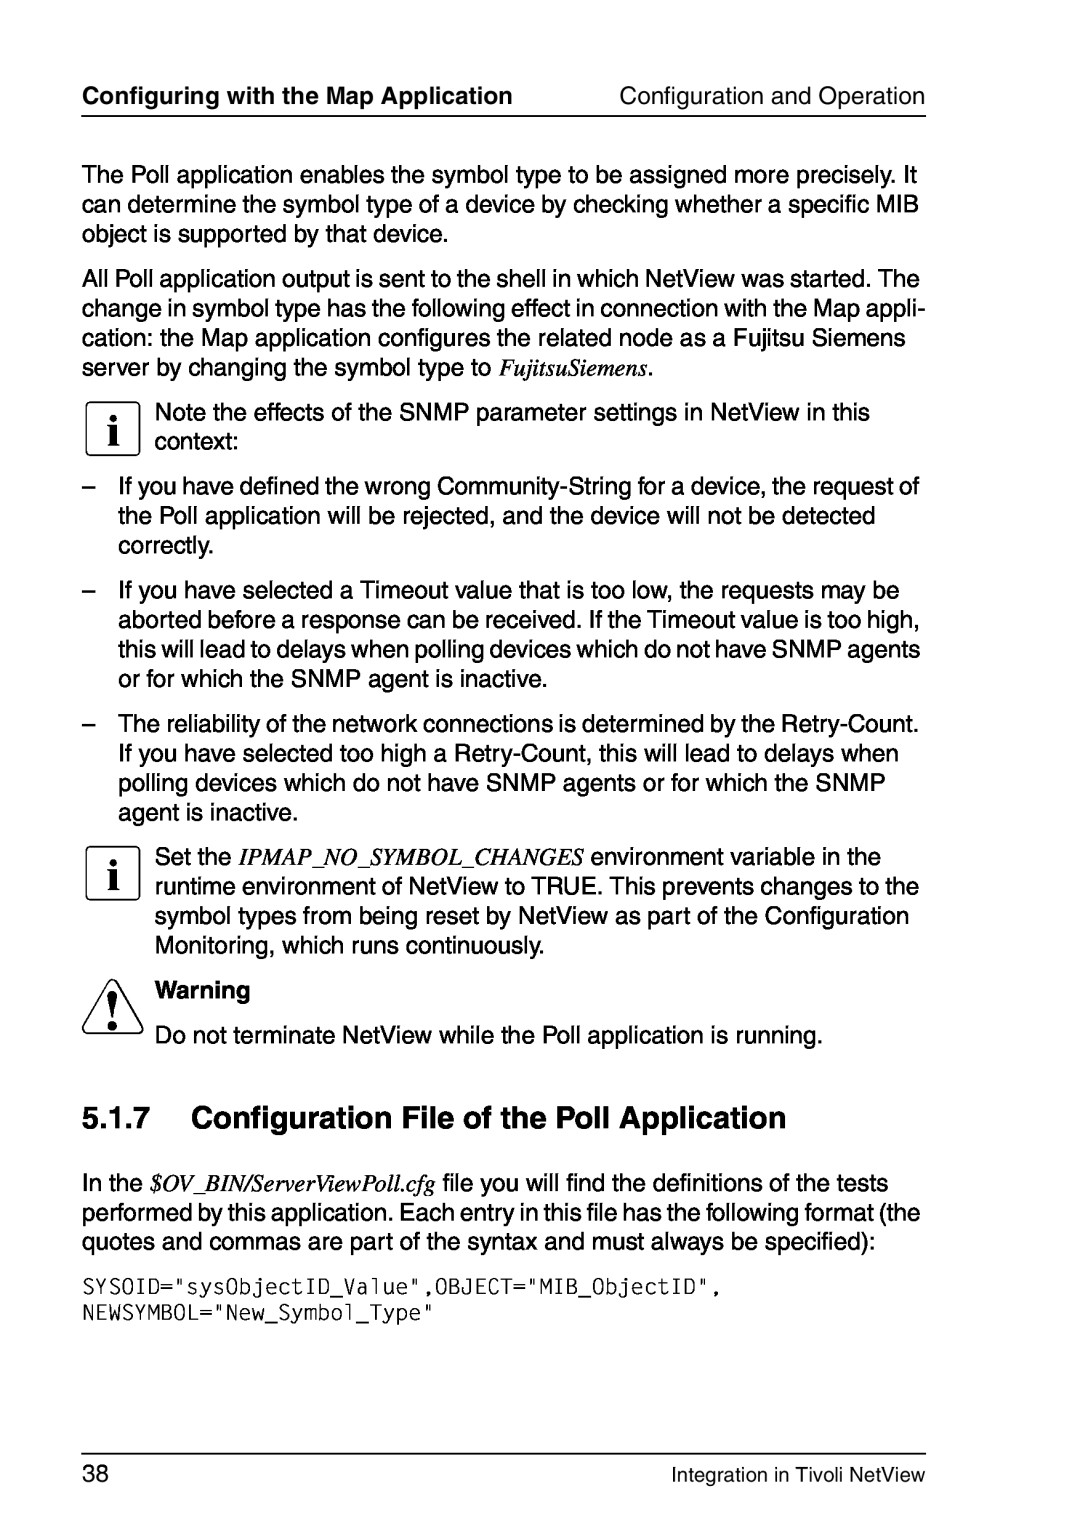 3D Connexion TivoII manual 5.1.7Configuration File of the Poll Application, VWarning, Configuring with the Map Application 